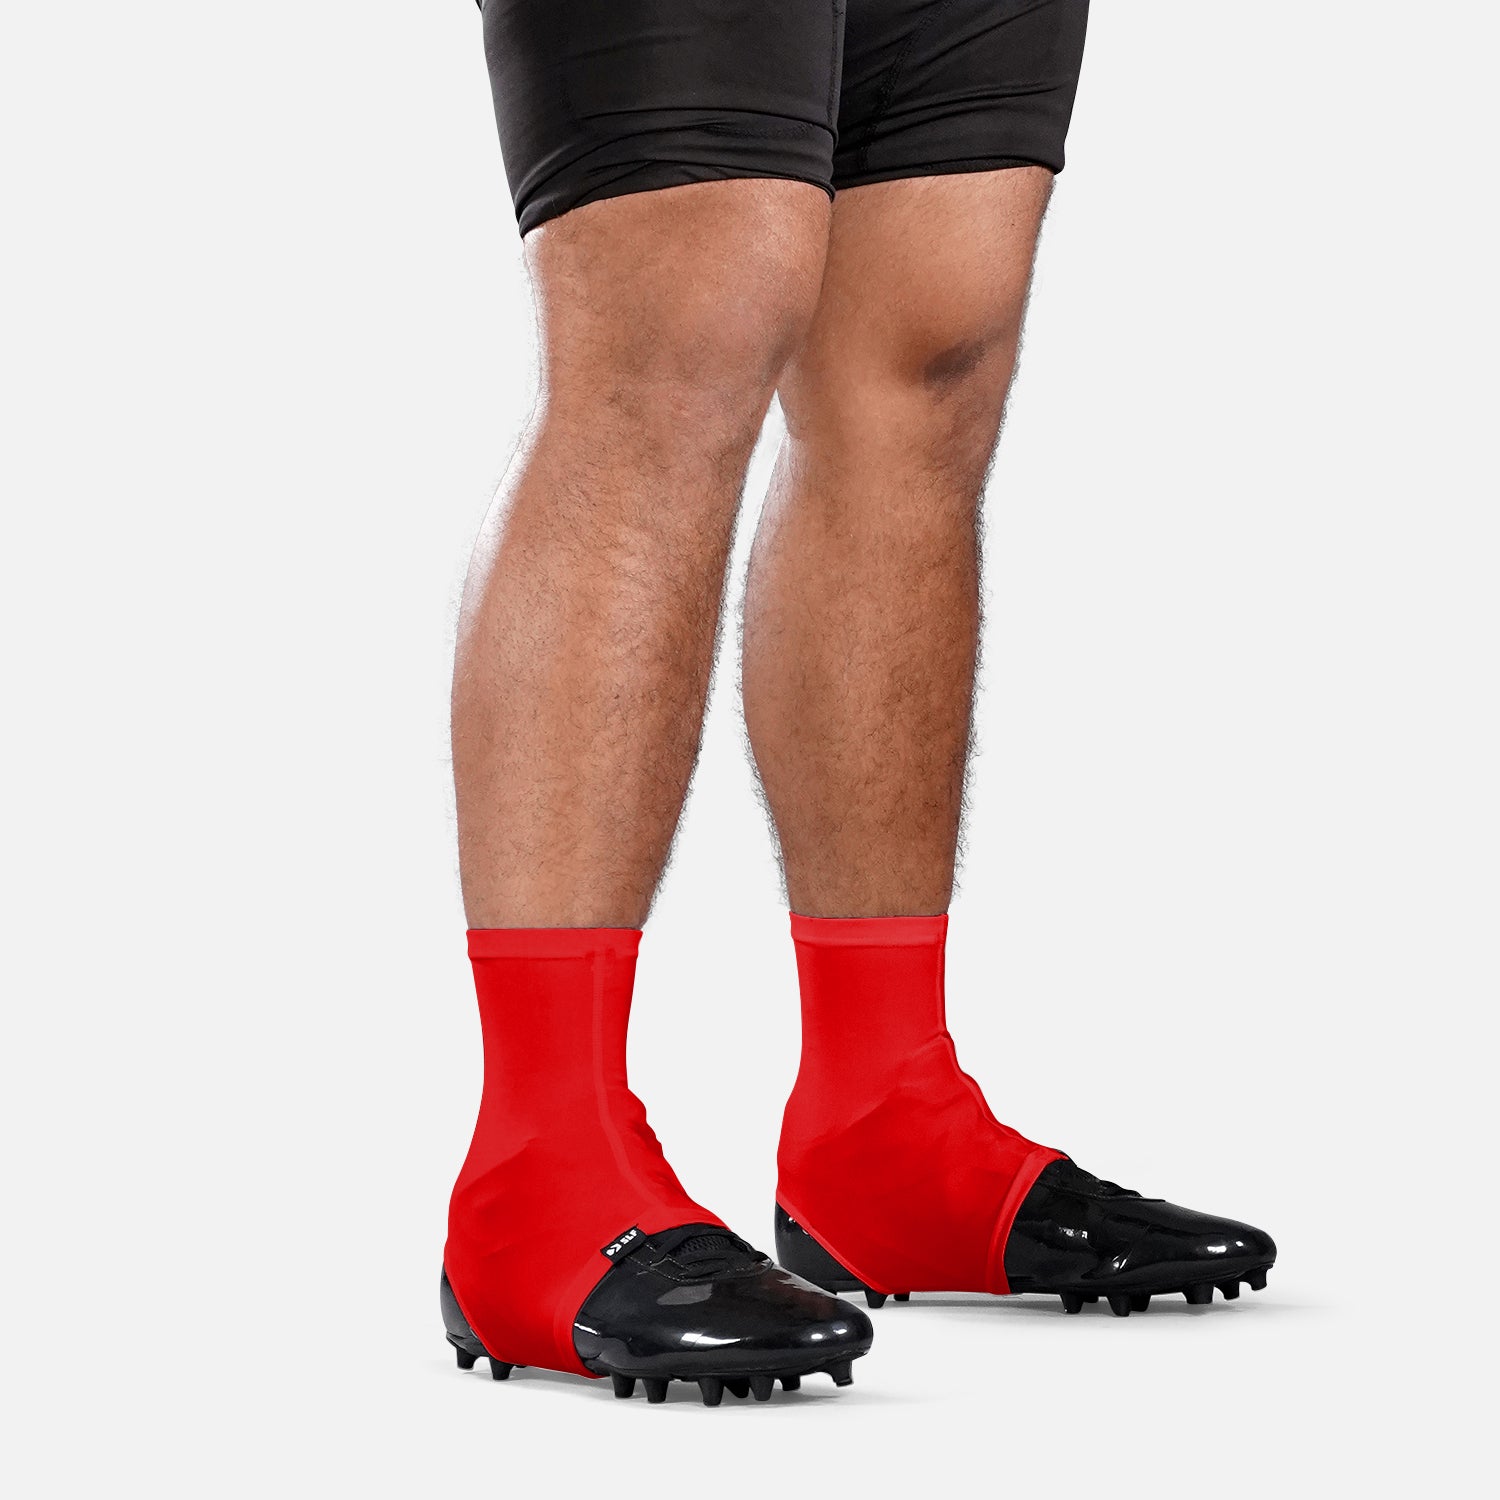 Hue Red Spats / Cleat Covers - Big – SLEEFS